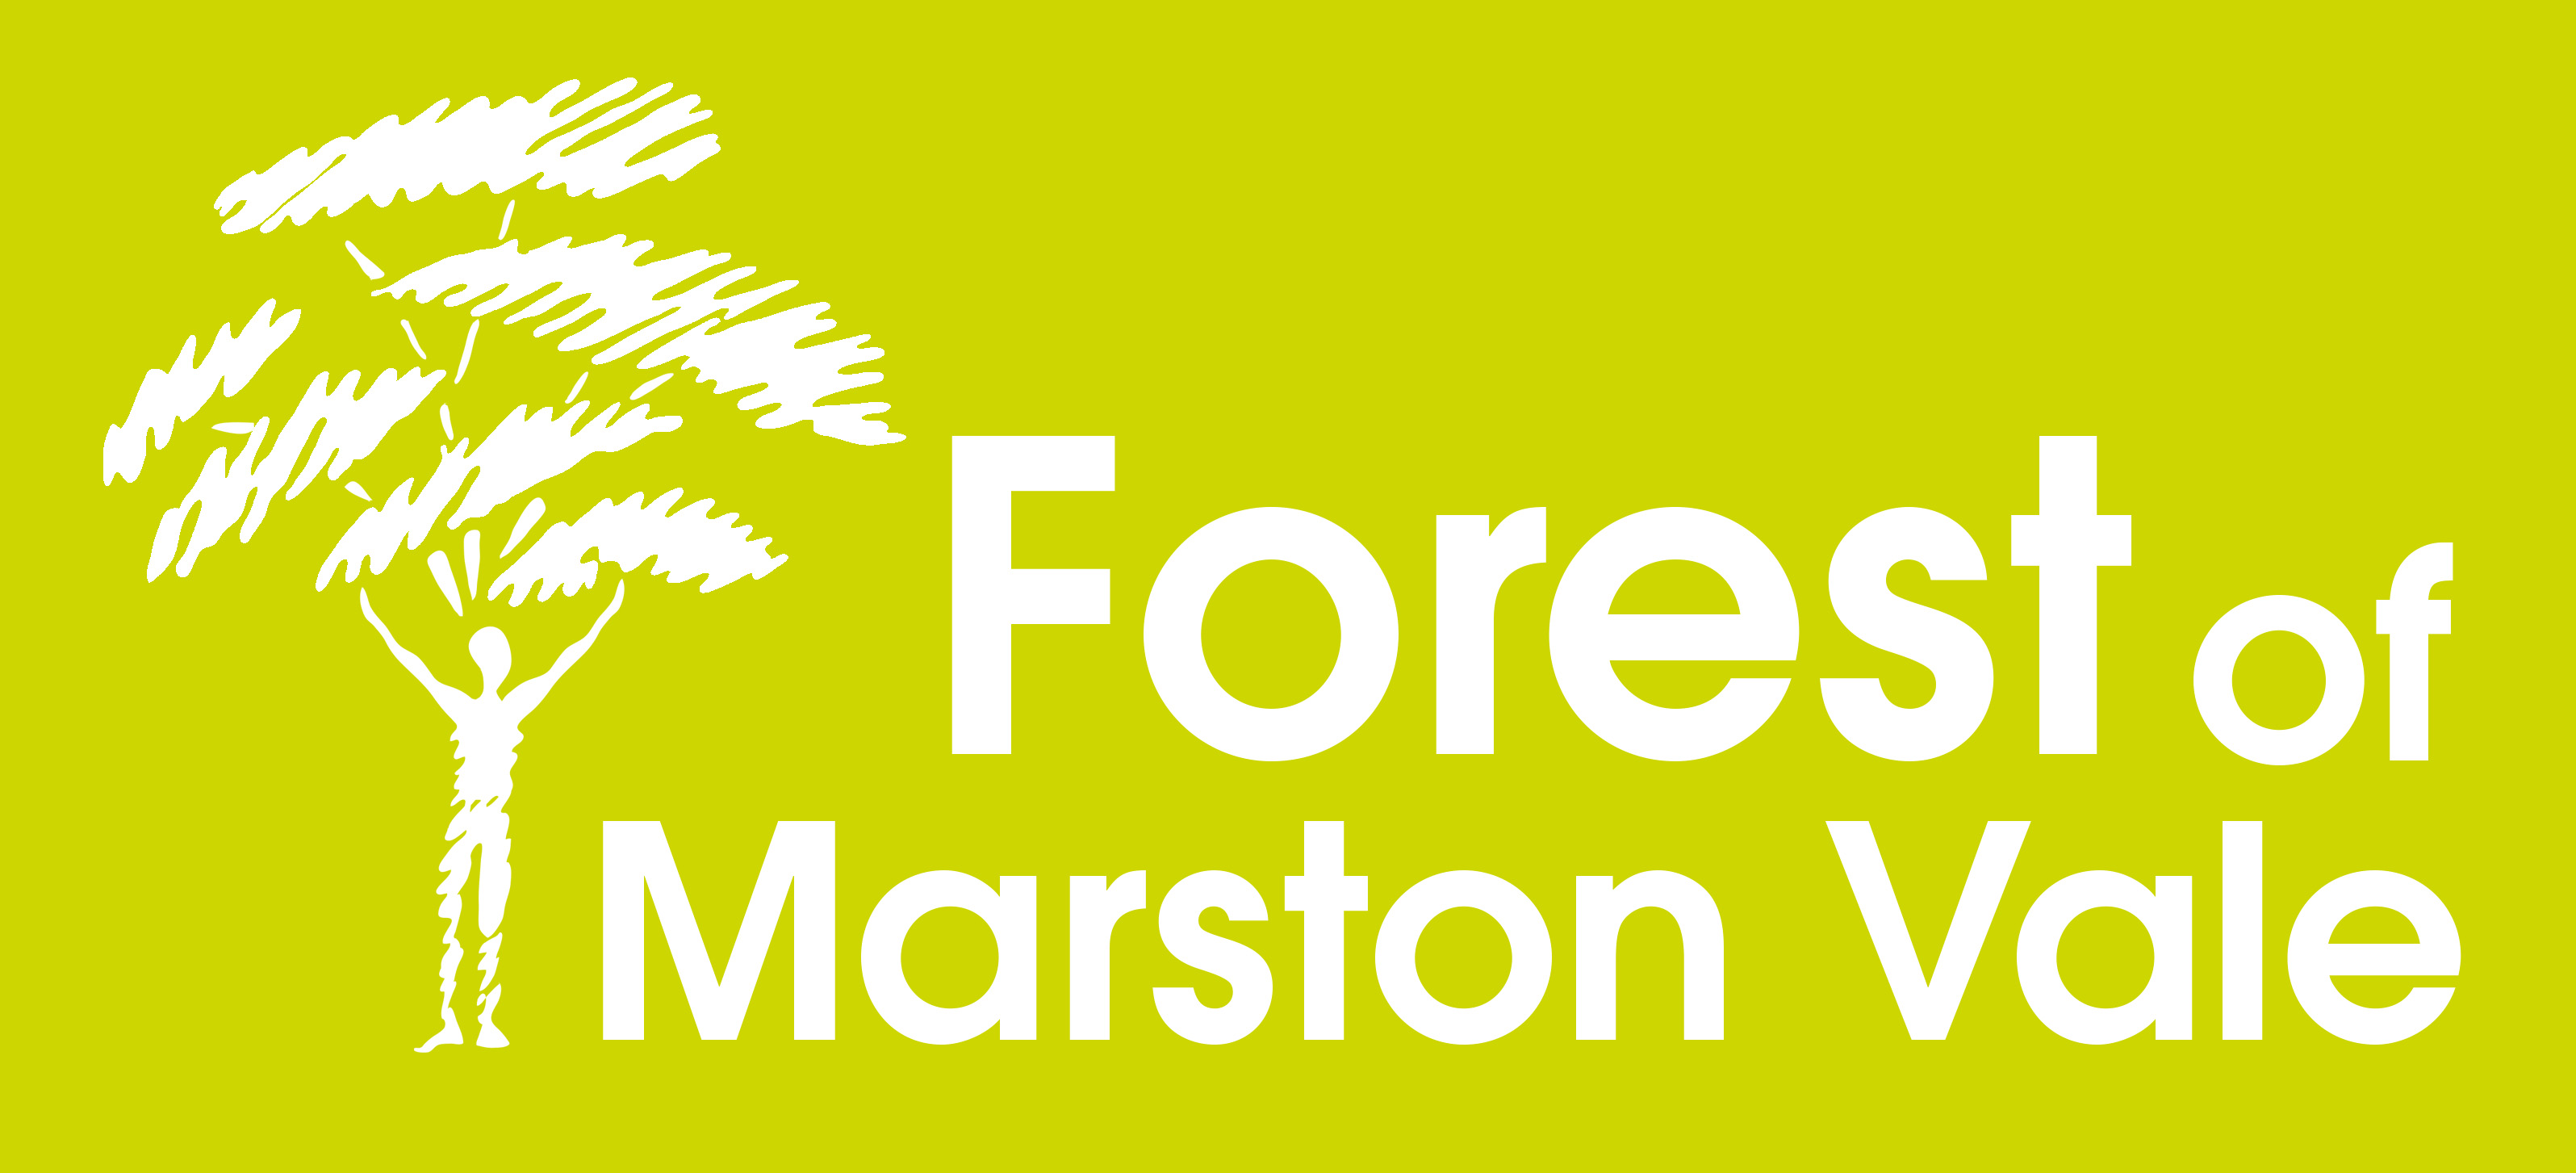 Forest of Marston Vale logo